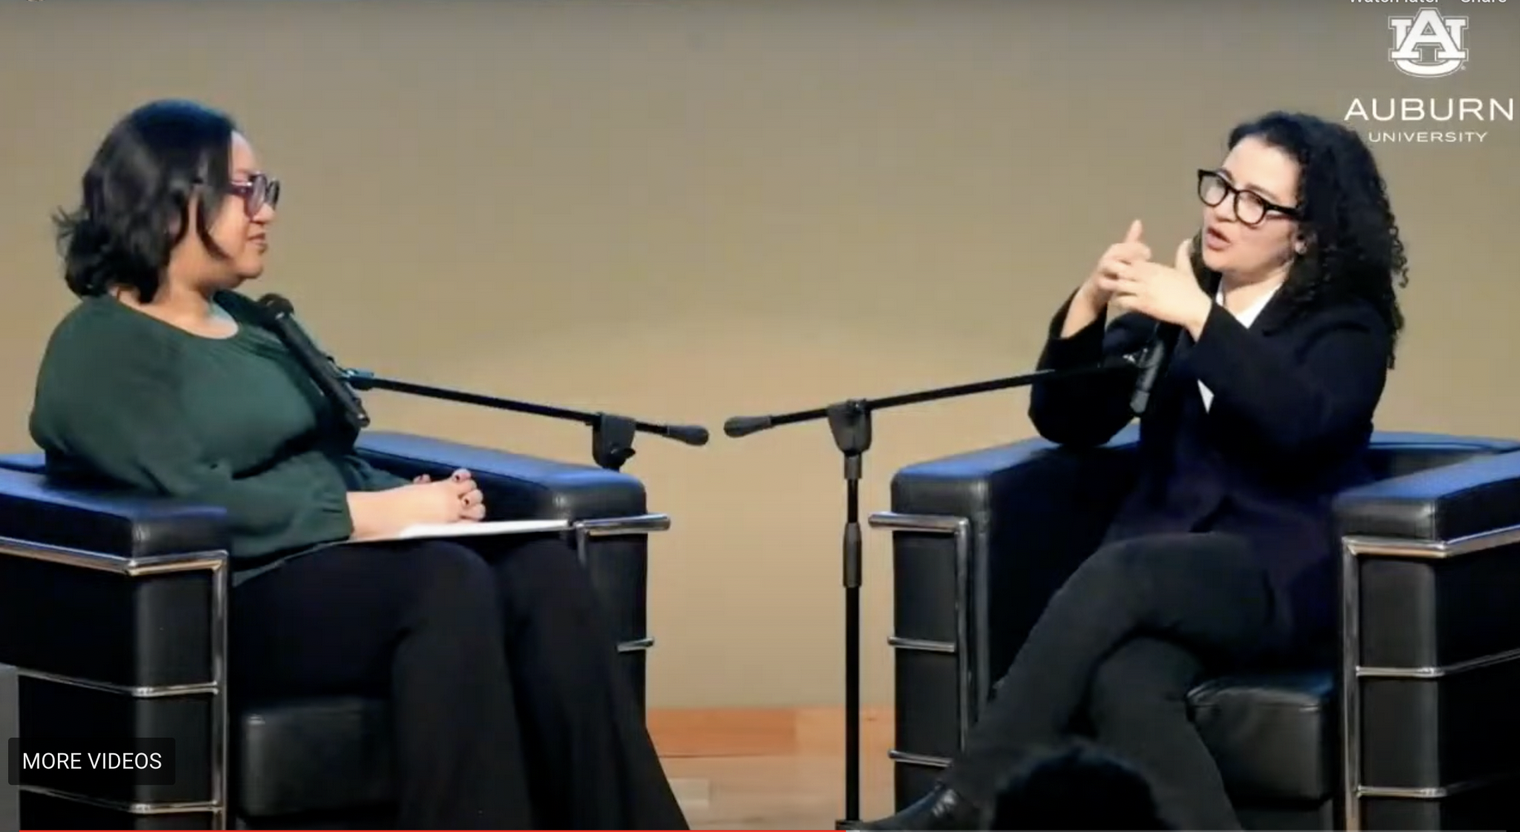 Two women sit conversing in chairs on stage